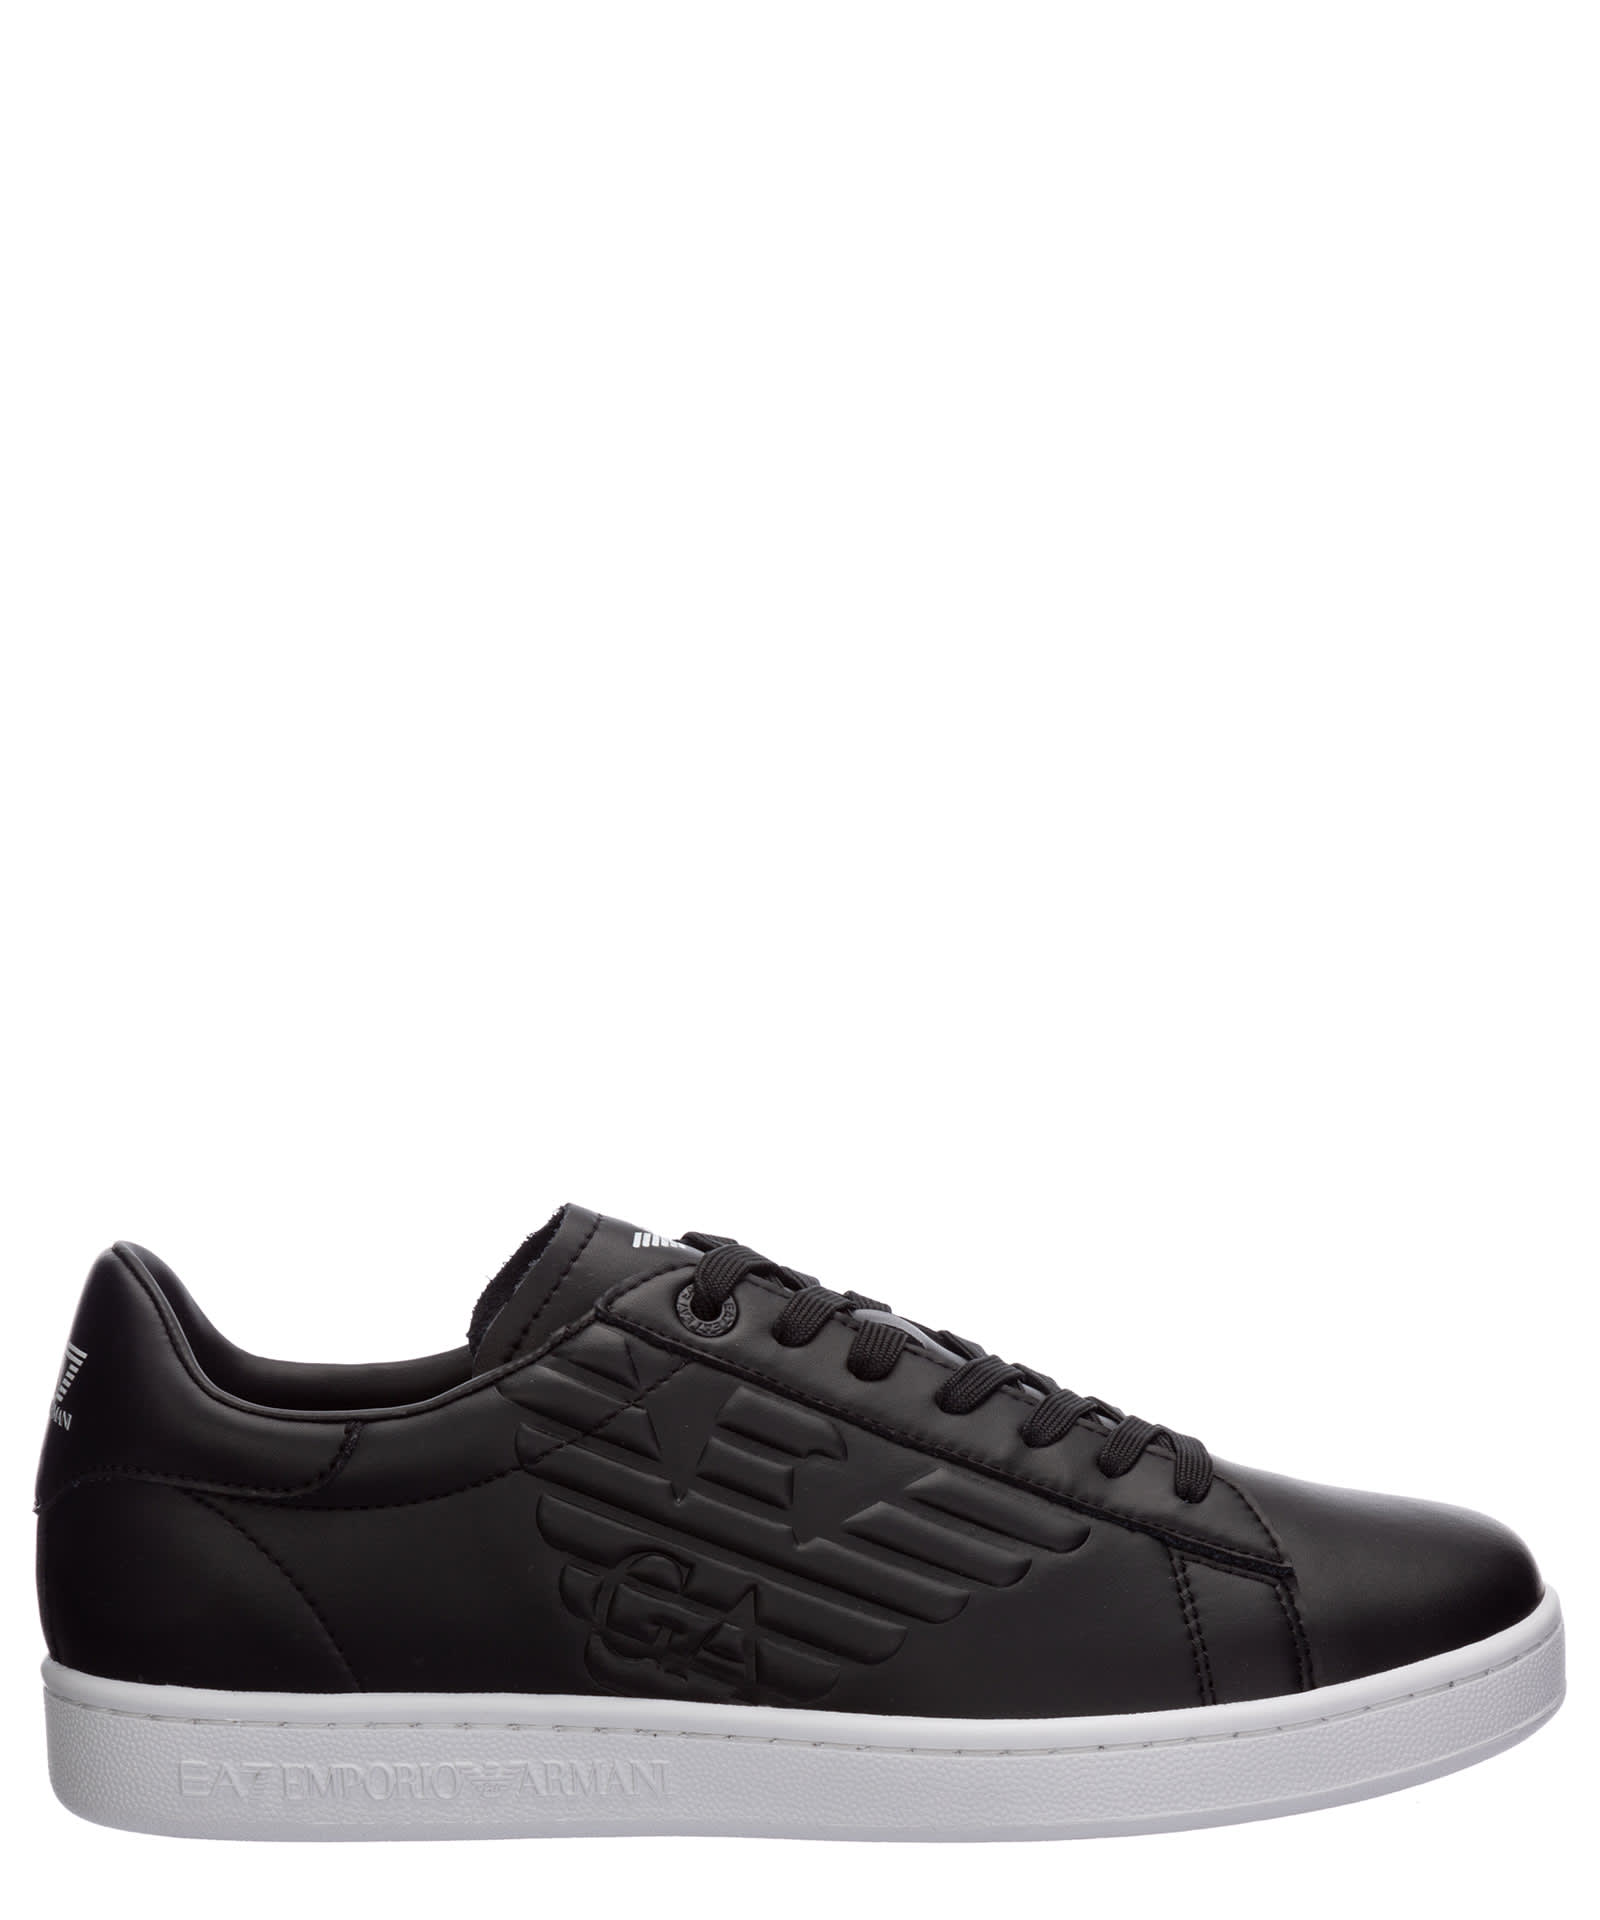 EA7 Classic Cc Leather Sneakers